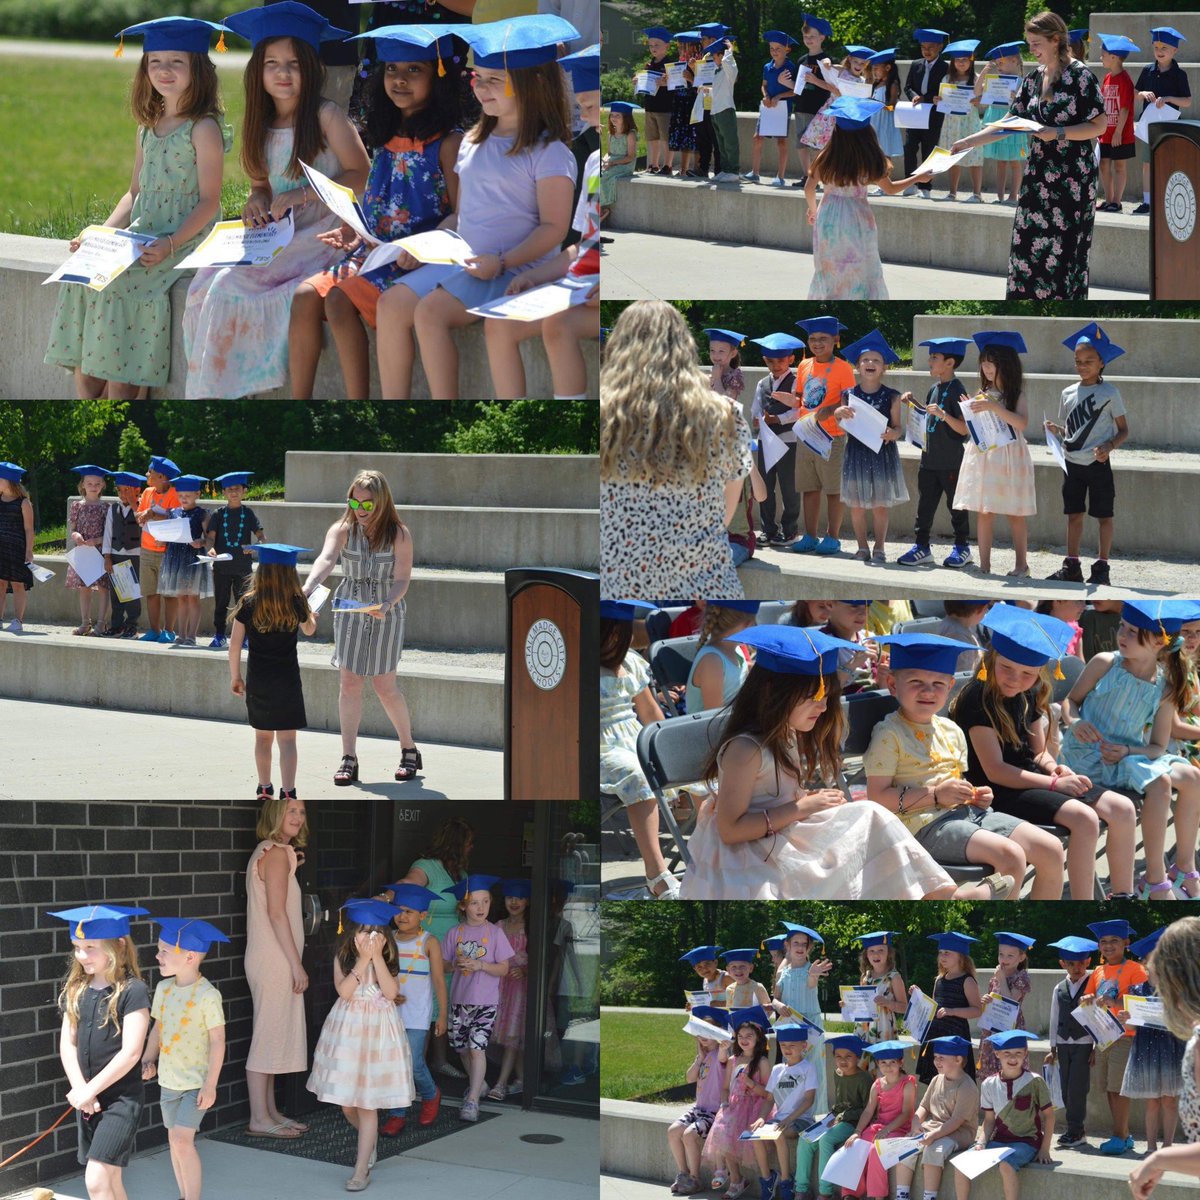 It was a beautiful day for our Kindergartners to graduate! Thank you to all the families who joined in celebrating these hard-working students. 
Special thank you to Mr. Ravida and all of the Kindergarten teachers and paraprofessionals for making today so special for the kids.